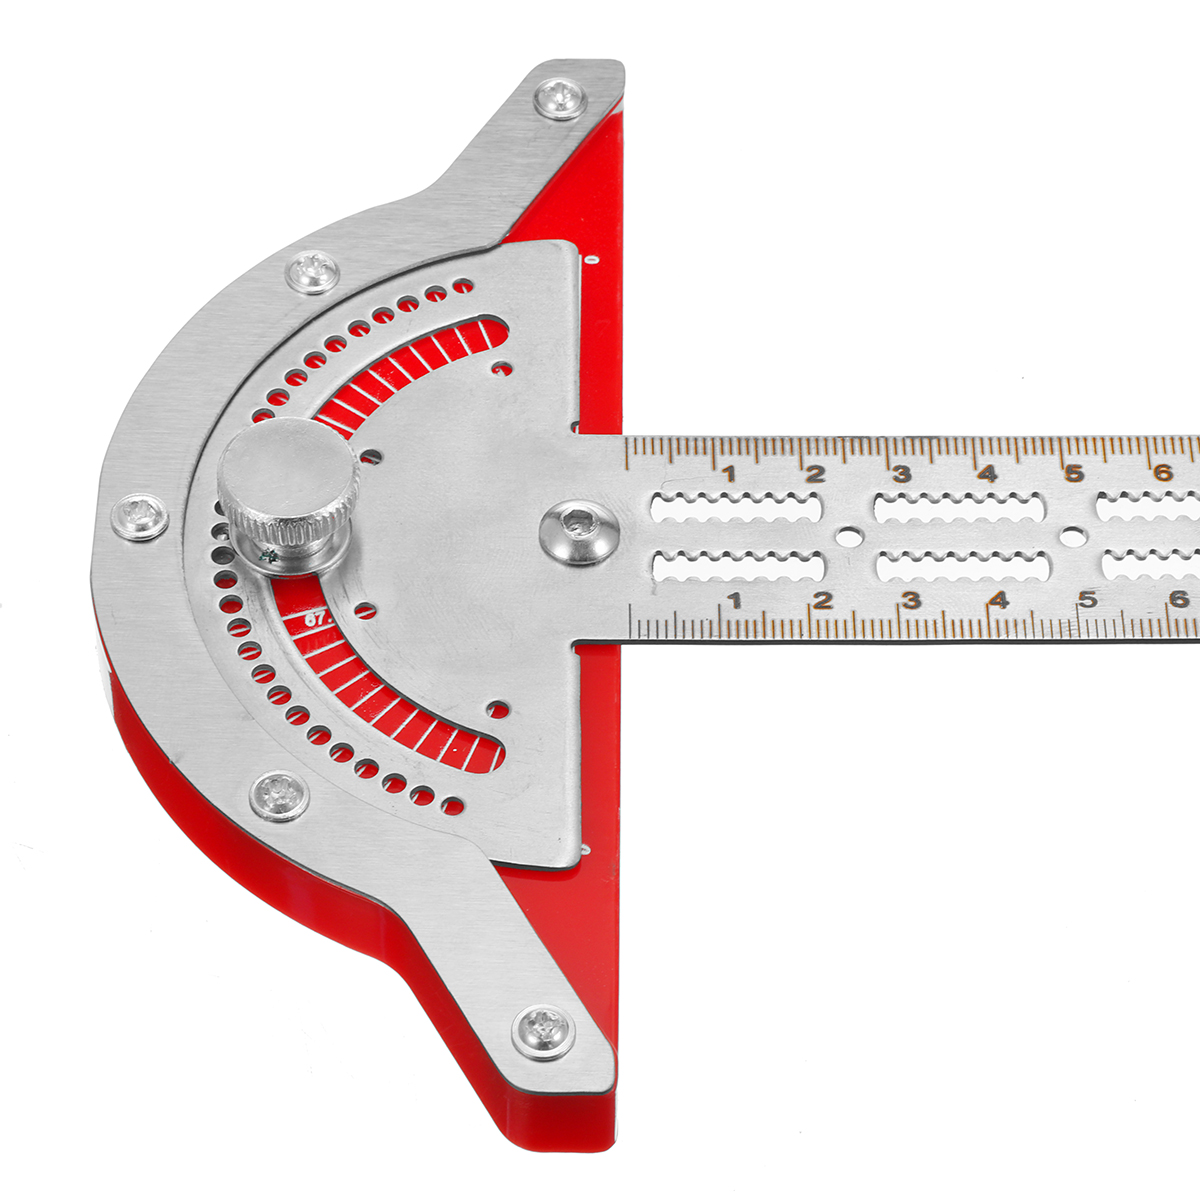 Stainless-Steel-Edge-Ruler-Protractor-Woodworking-Ruler-Angle-Measuring-Tool-Precision-Carpenter-Too-1923789-9